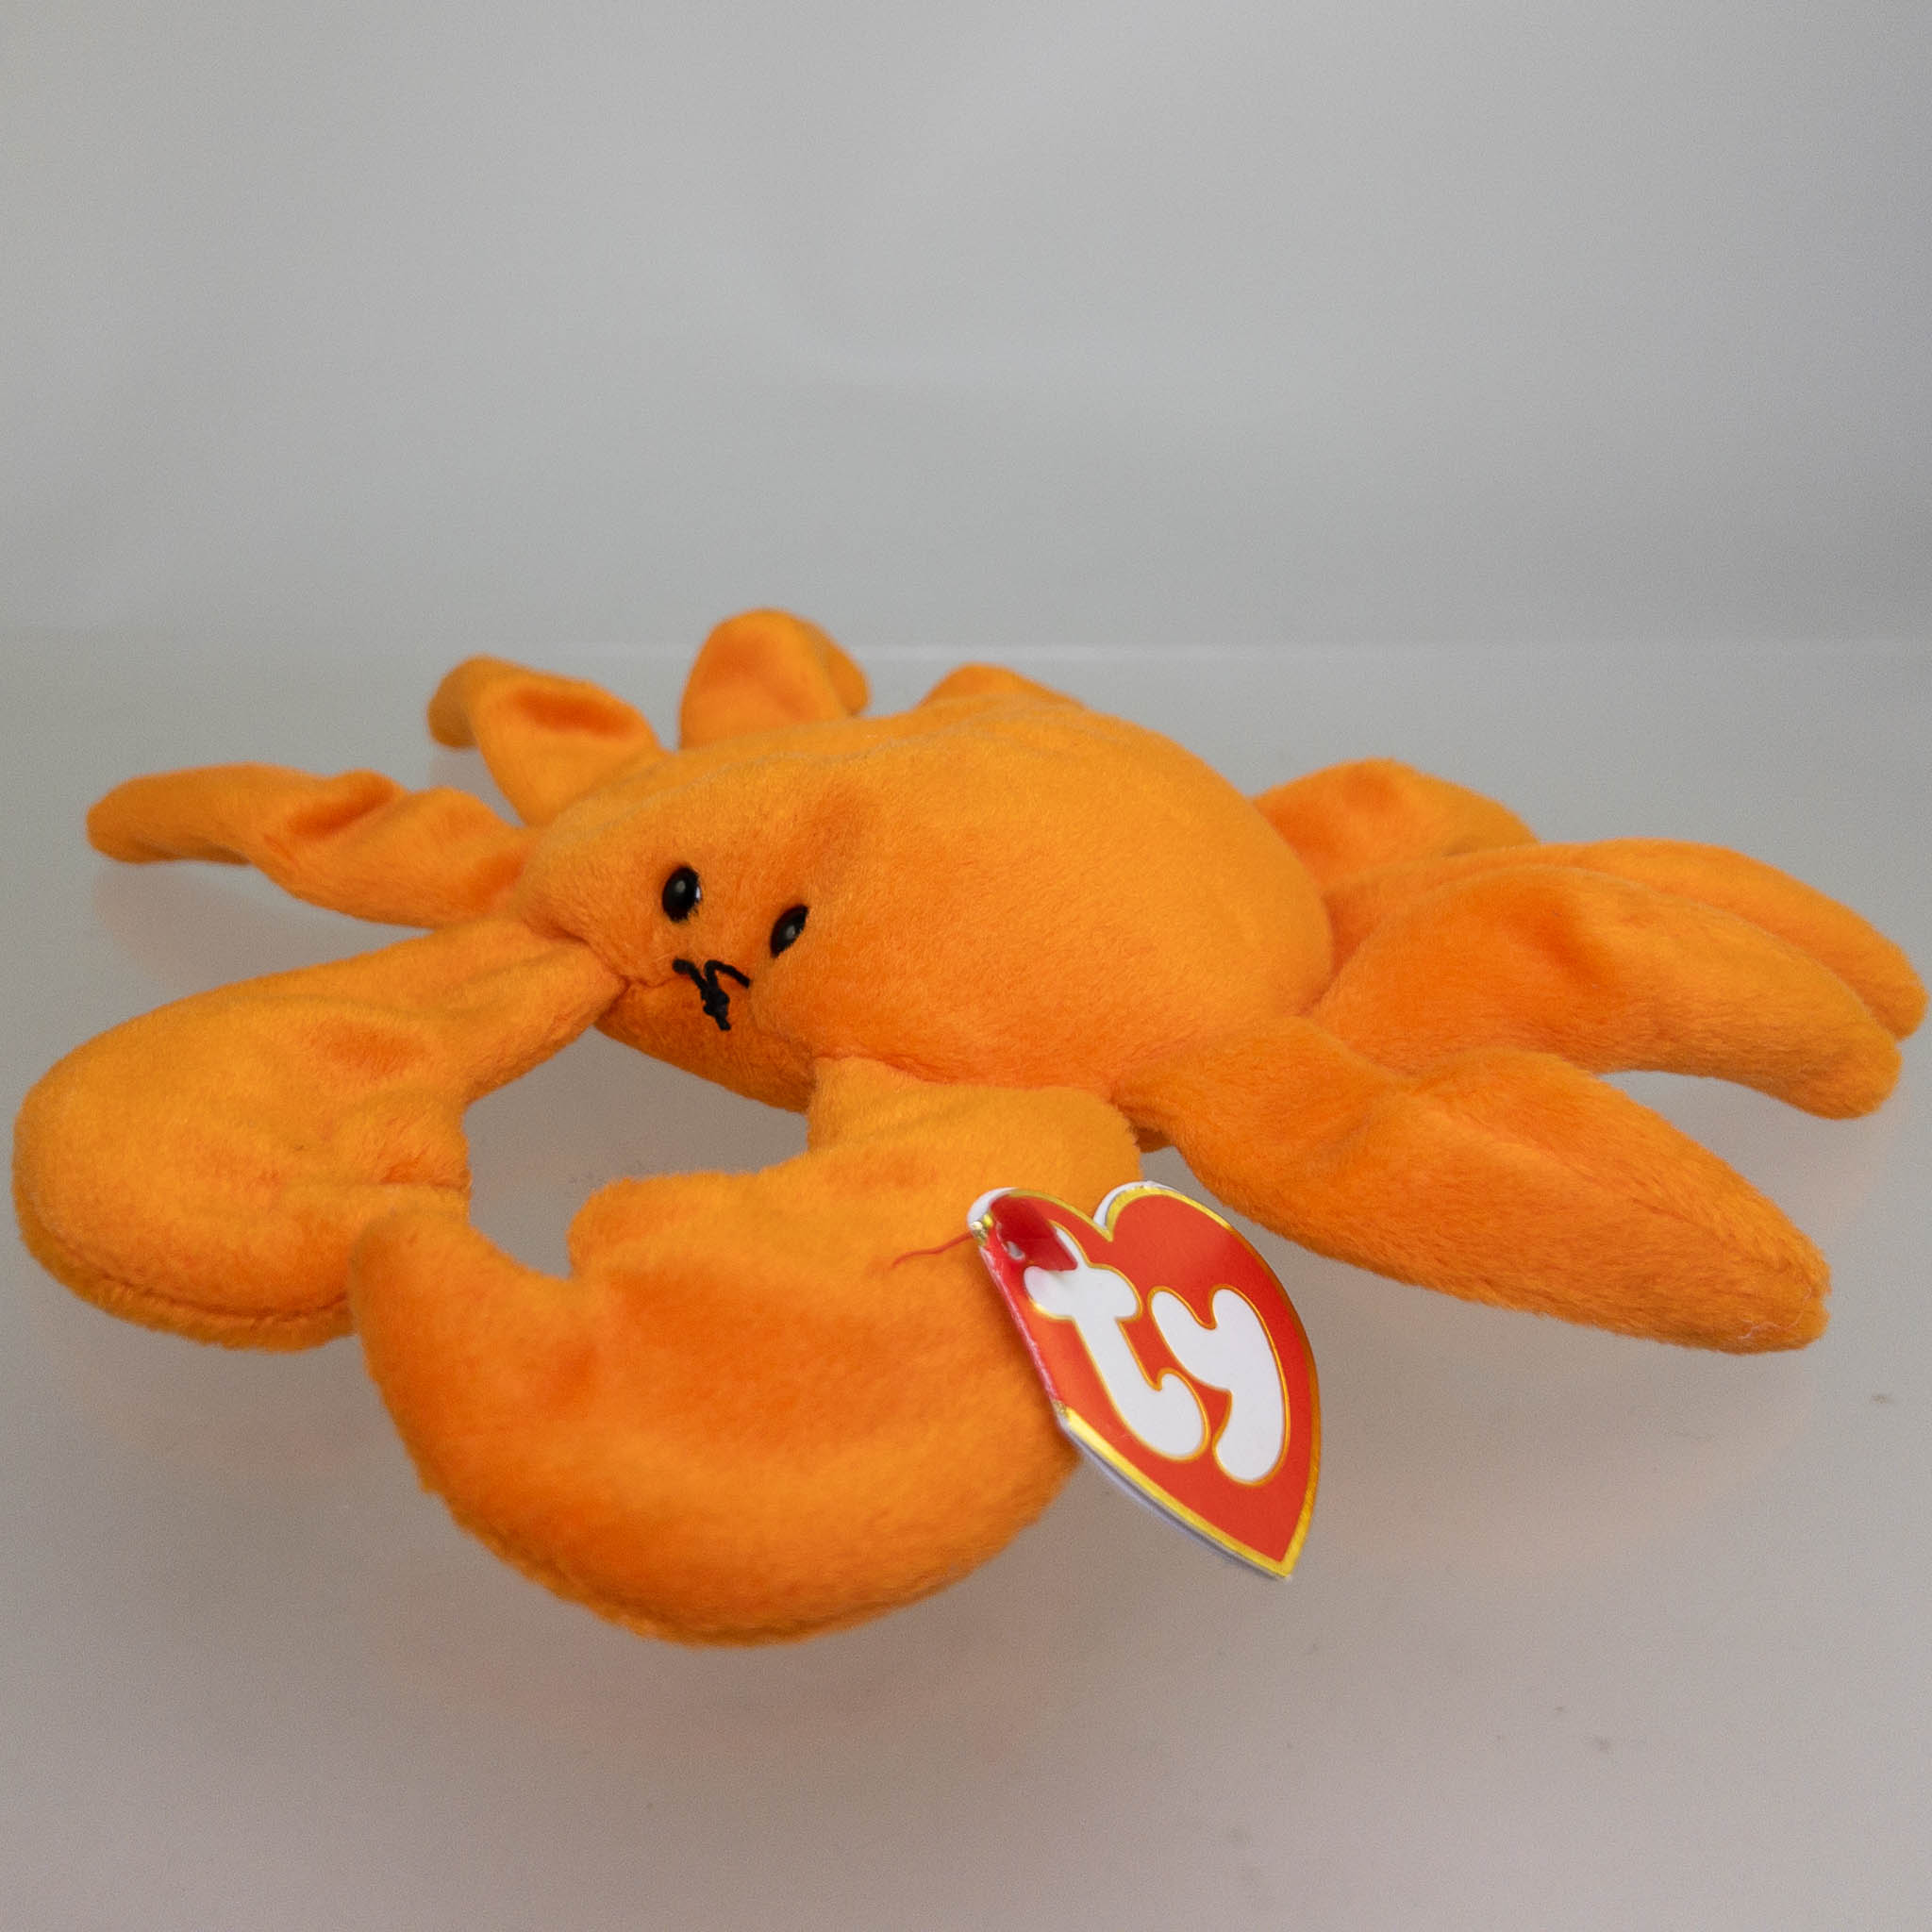 TY Beanie Baby - DIGGER the Crab (Orange Version) (3rd Gen Hang Tag - MWMTs)